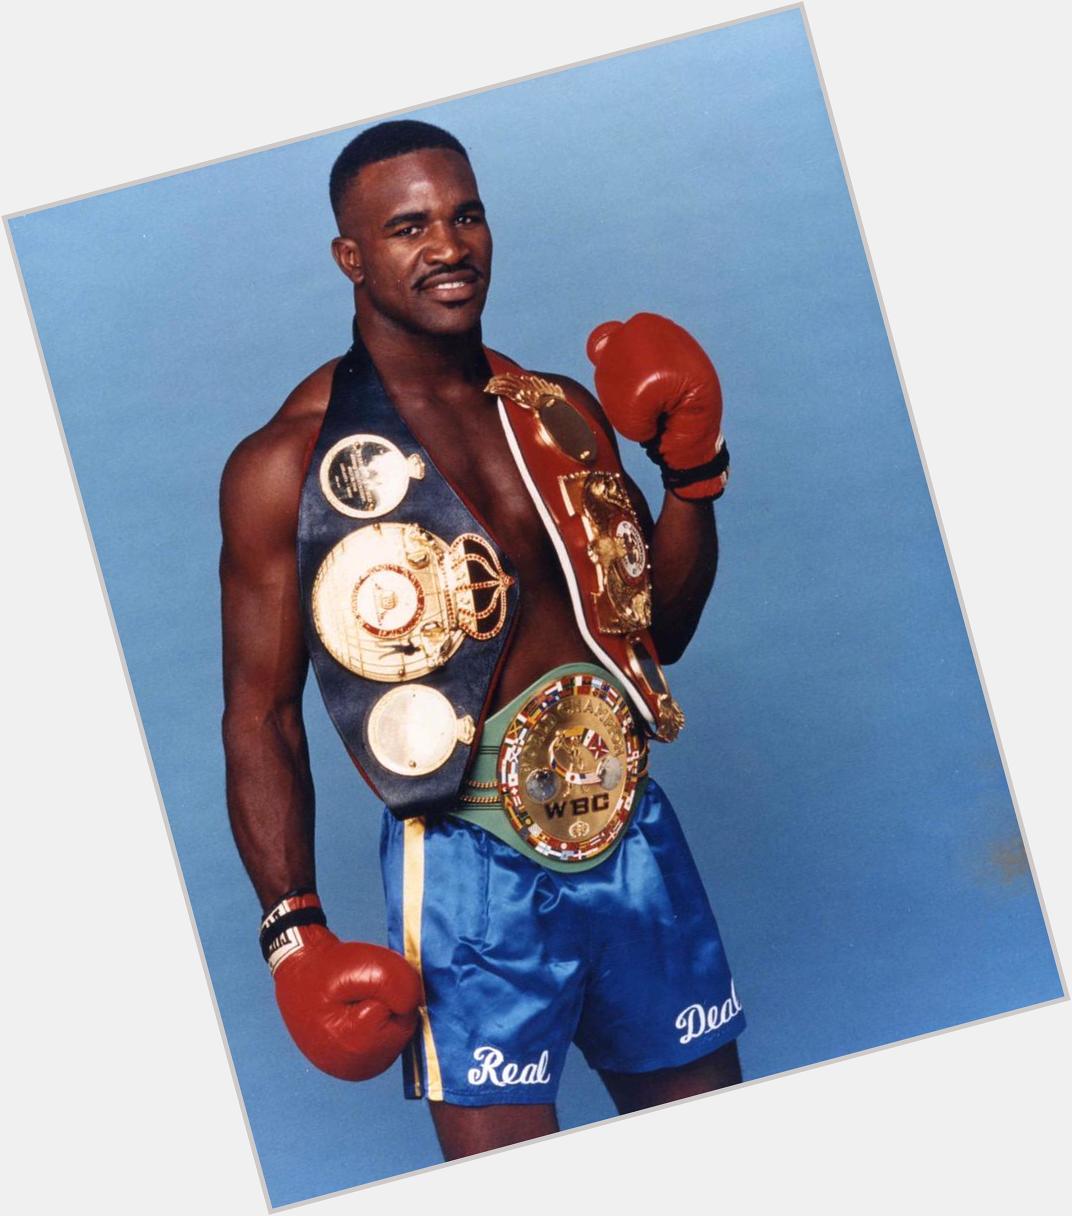 Happy 53rd birthday to the only 4x world heavyweight champion, \"The Real Deal\", Evander Holyfield. 